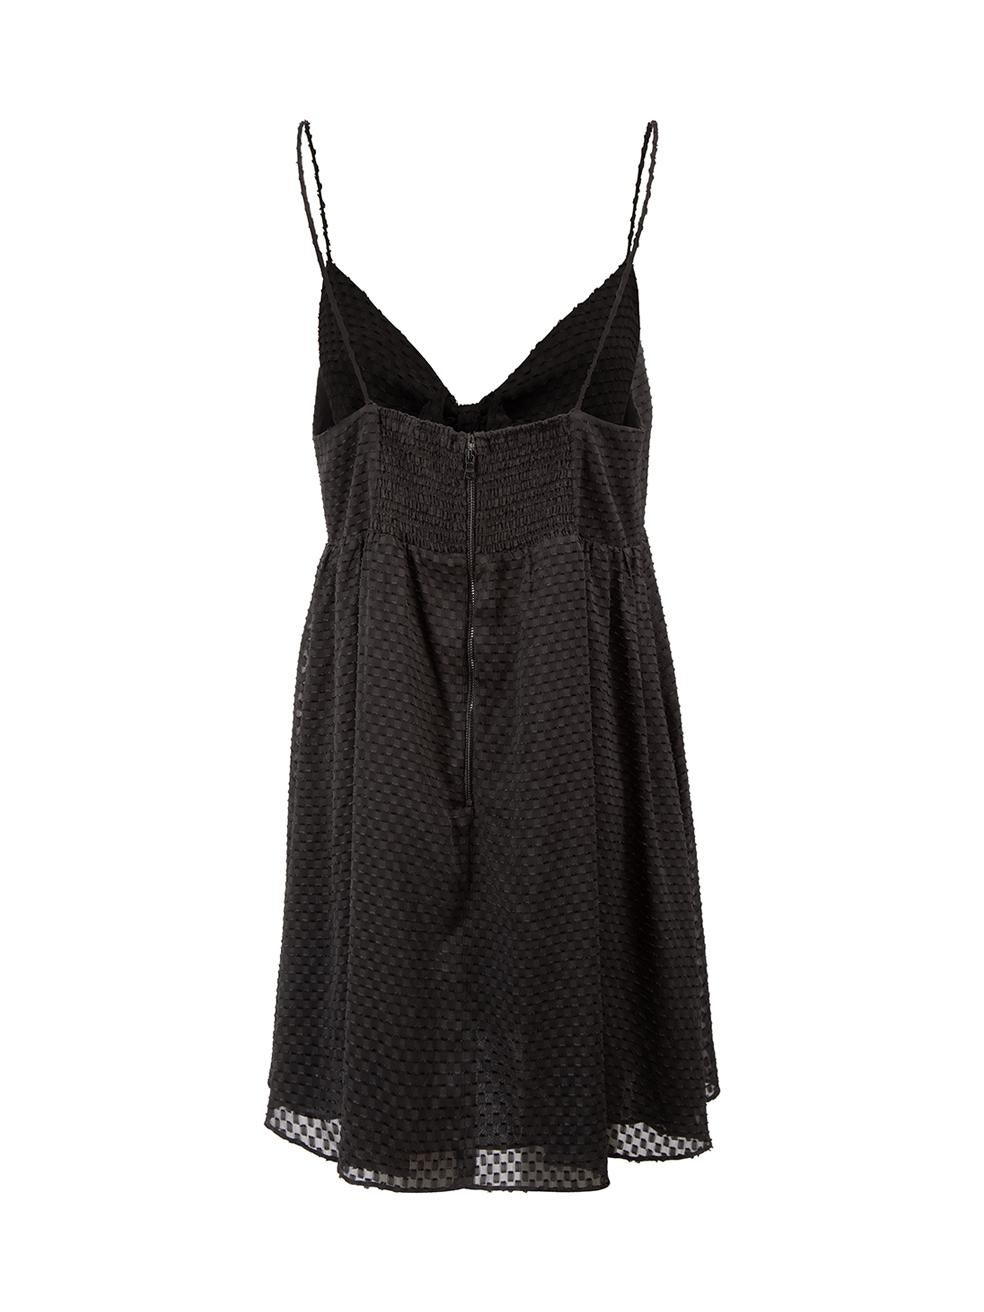 Alice & Olivia Women's Black Tufted Texture Tank Top In Good Condition For Sale In London, GB